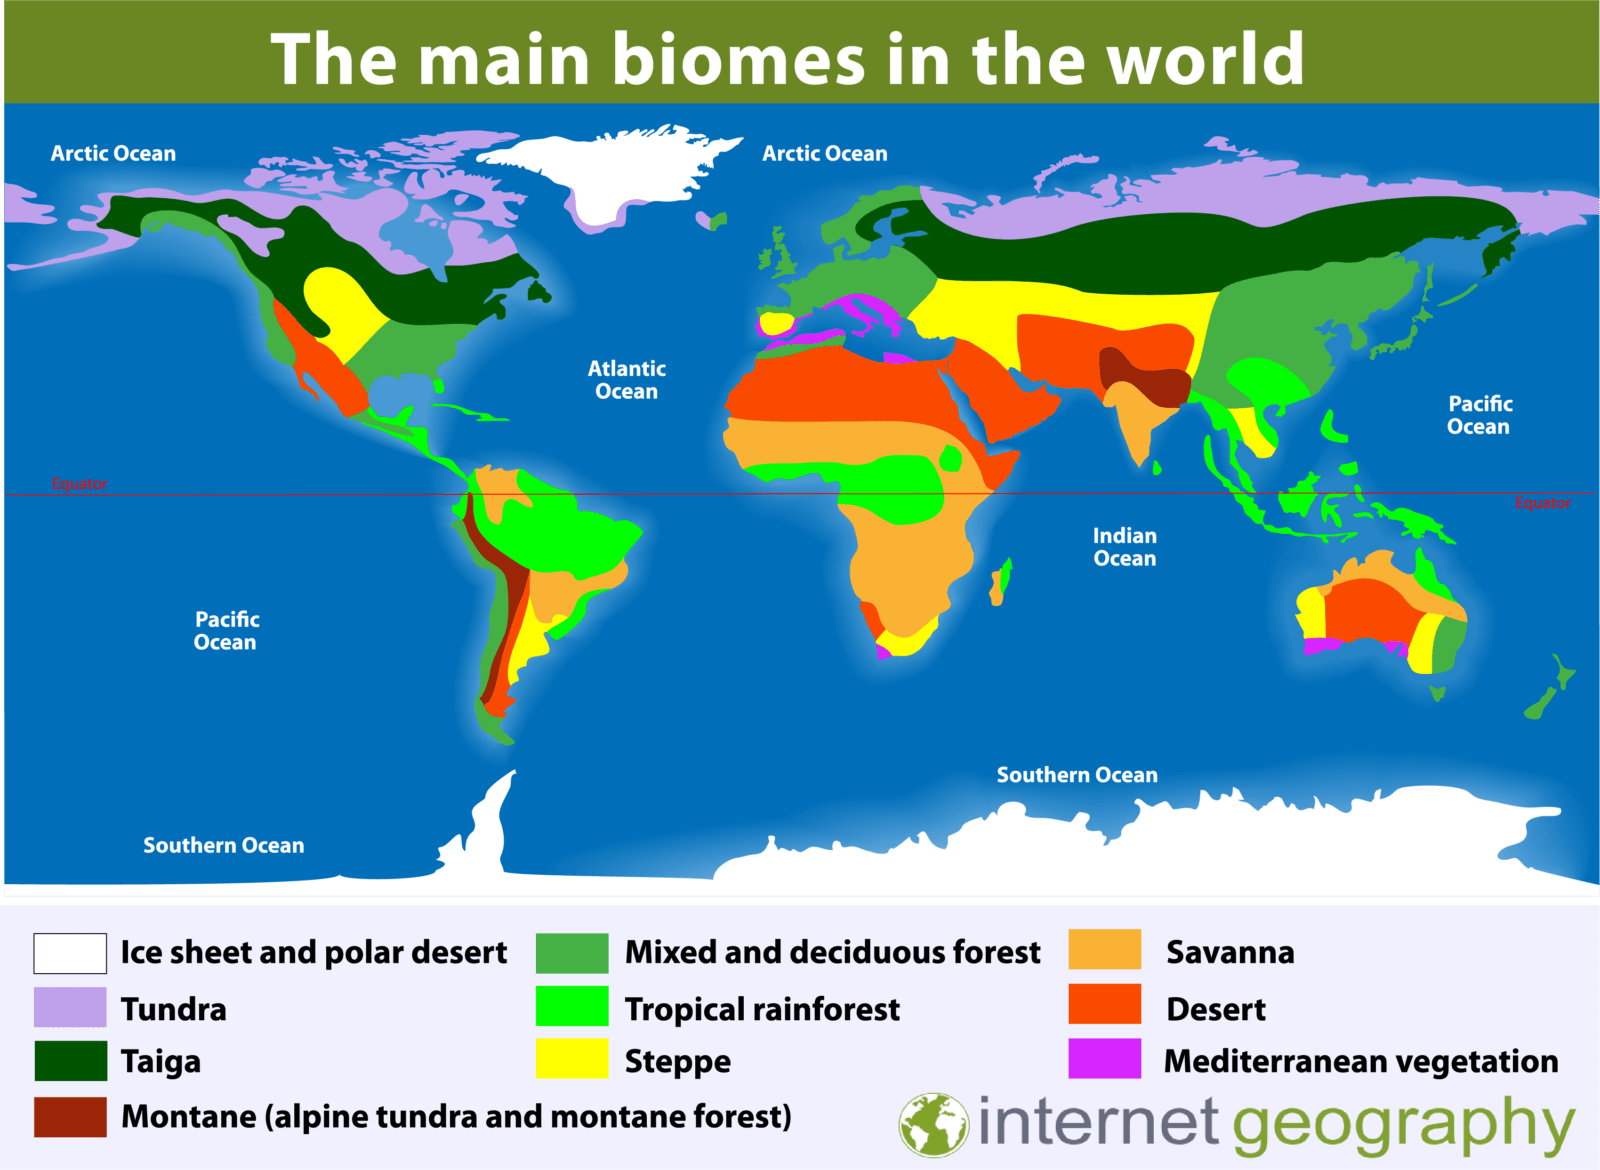 A map to show the main biomes of the world